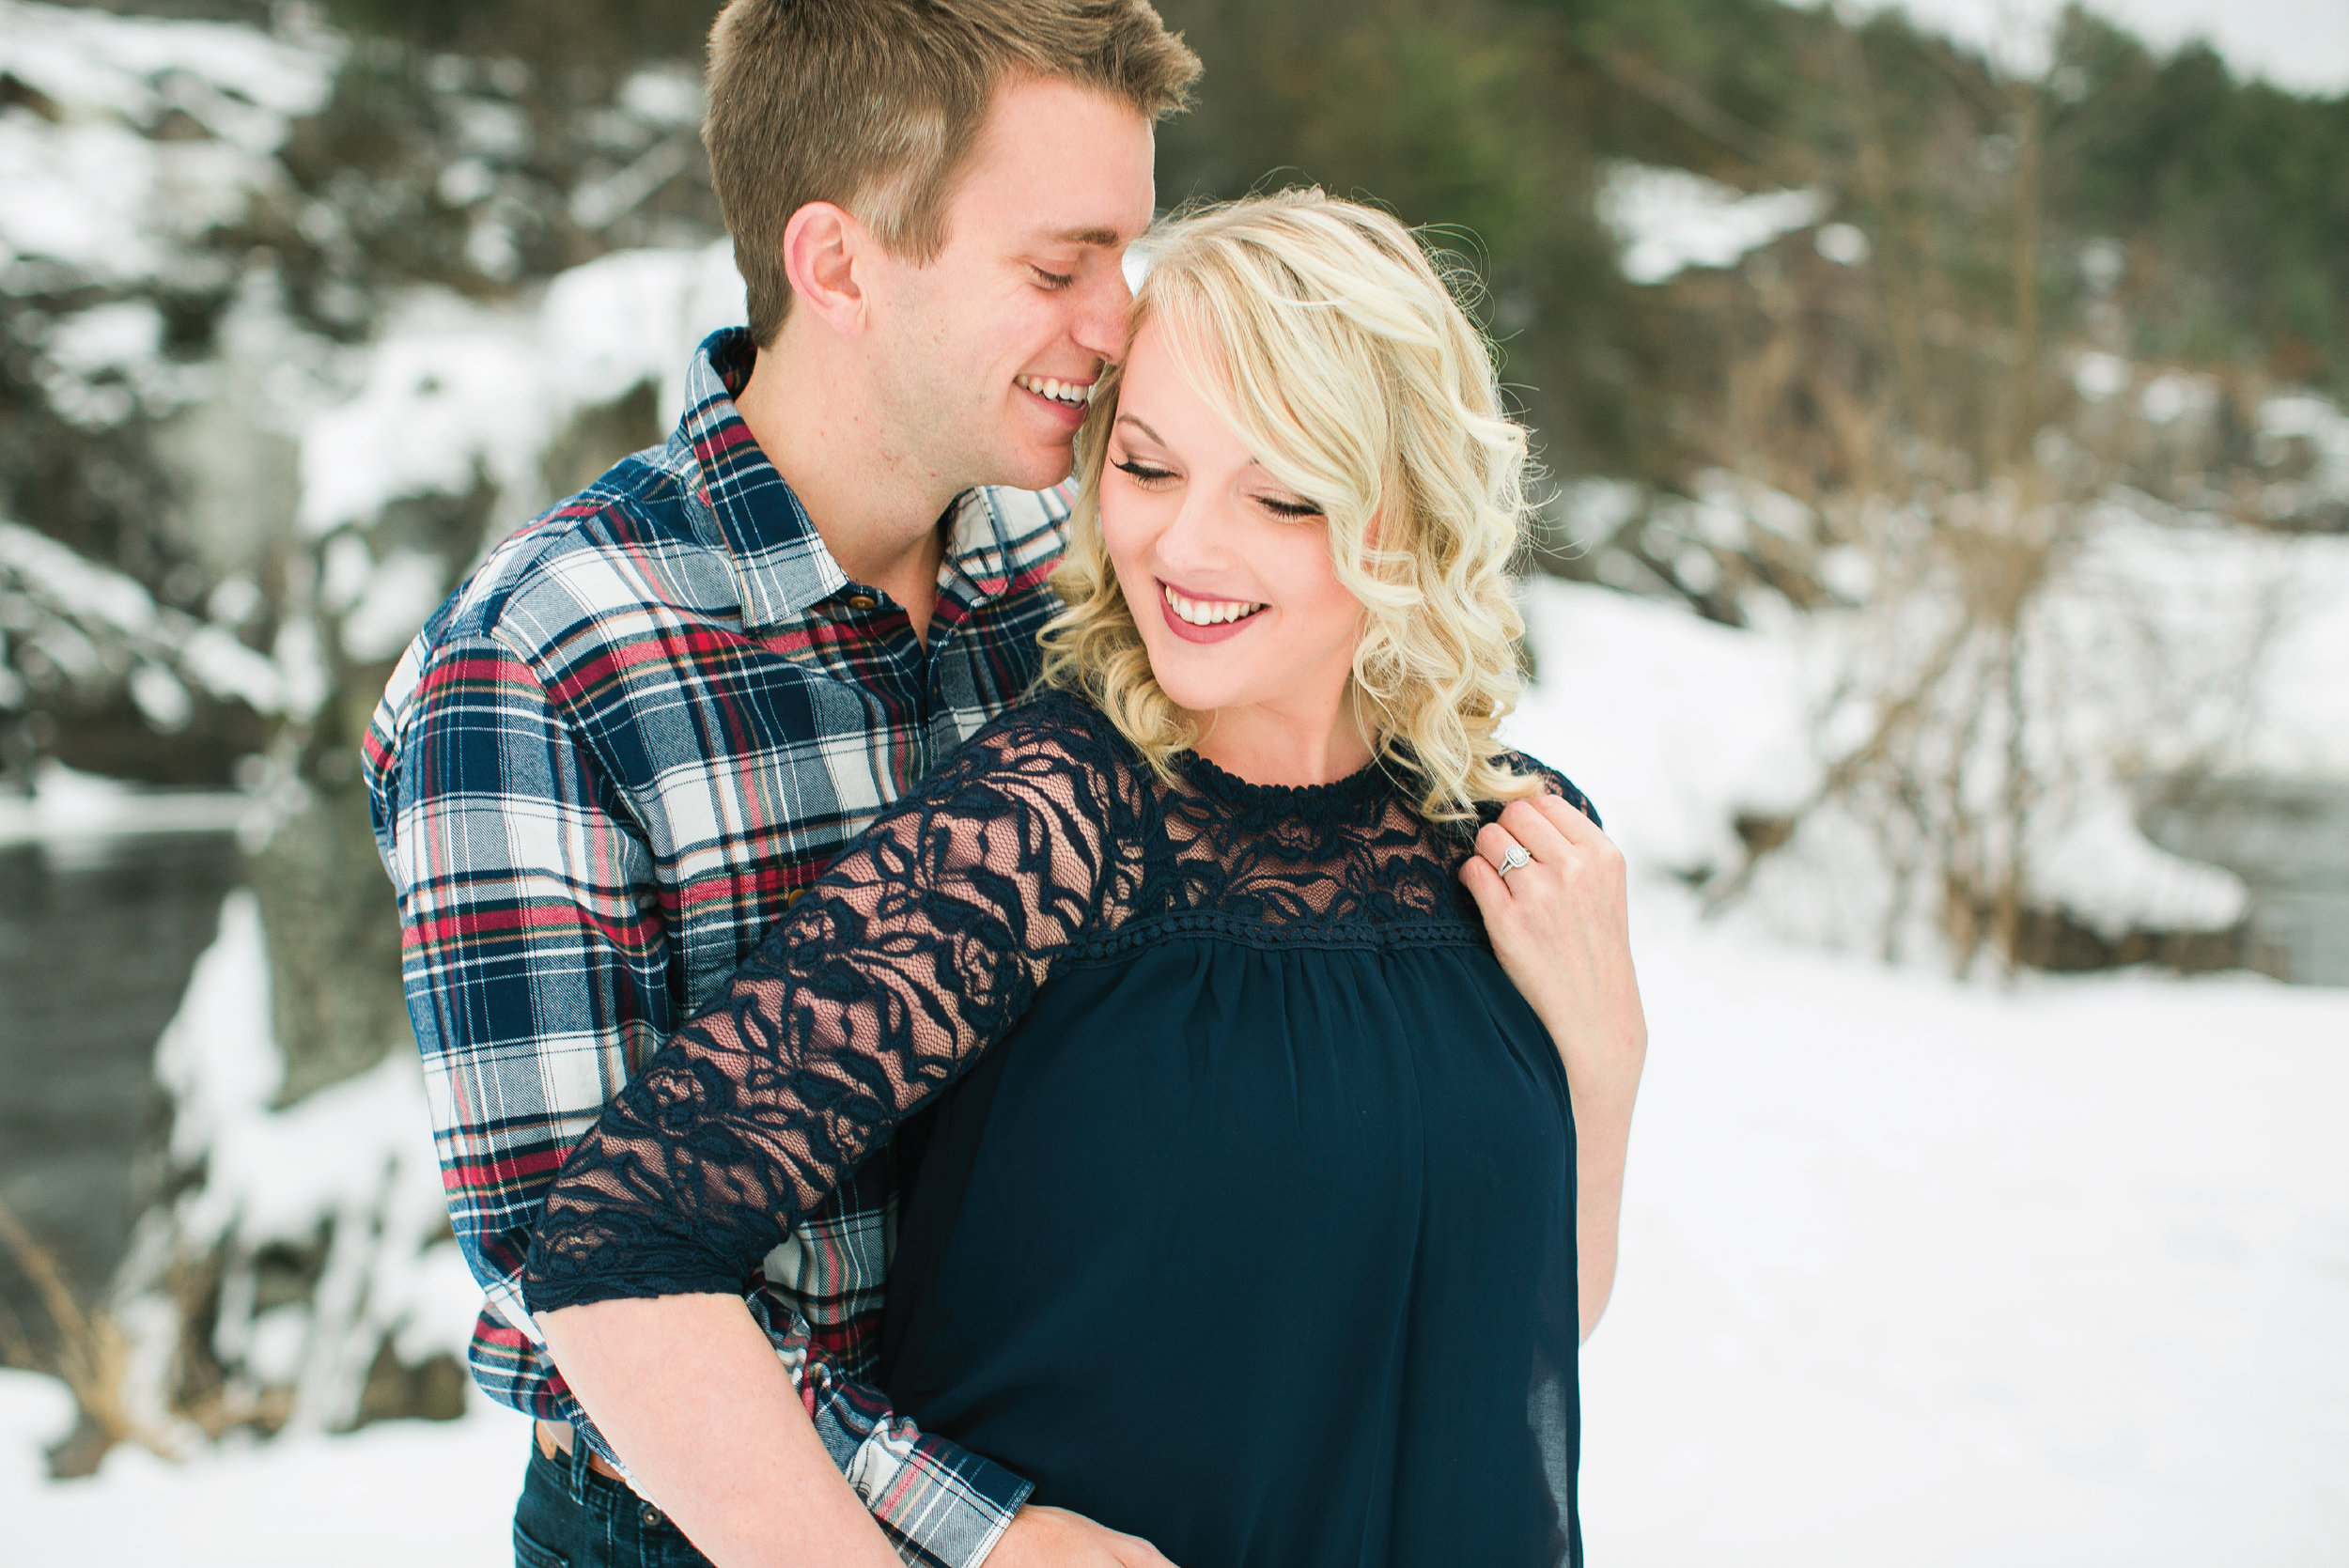 Minnesota snowy winter engagement photos in Taylors Falls Minnesota laughing in navy lace and plaid